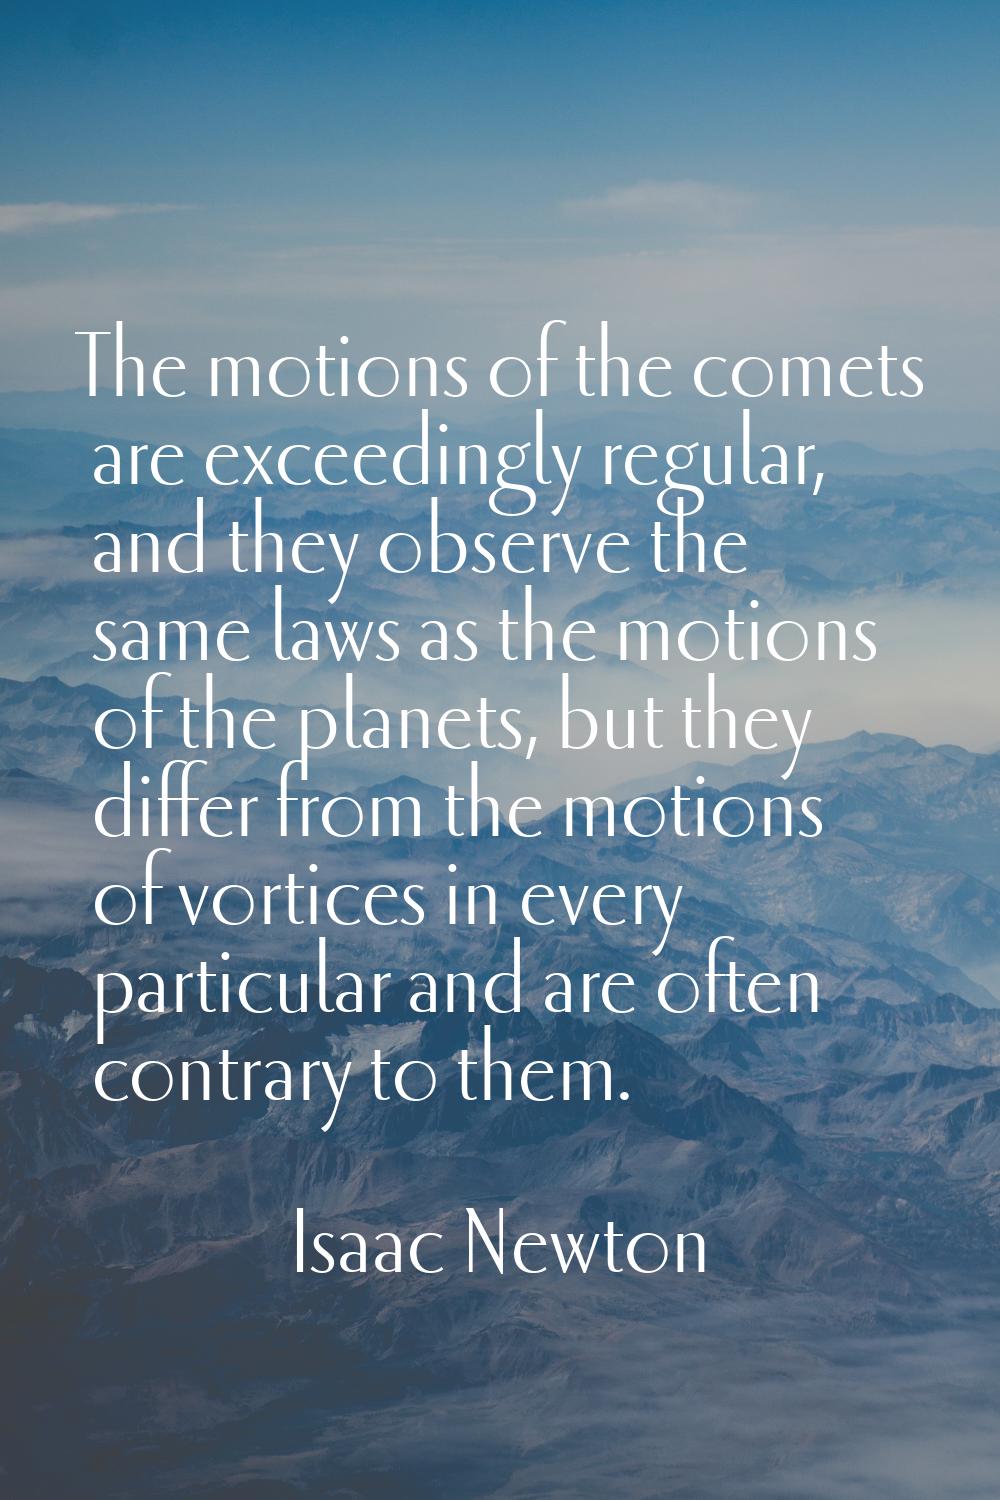 The motions of the comets are exceedingly regular, and they observe the same laws as the motions of